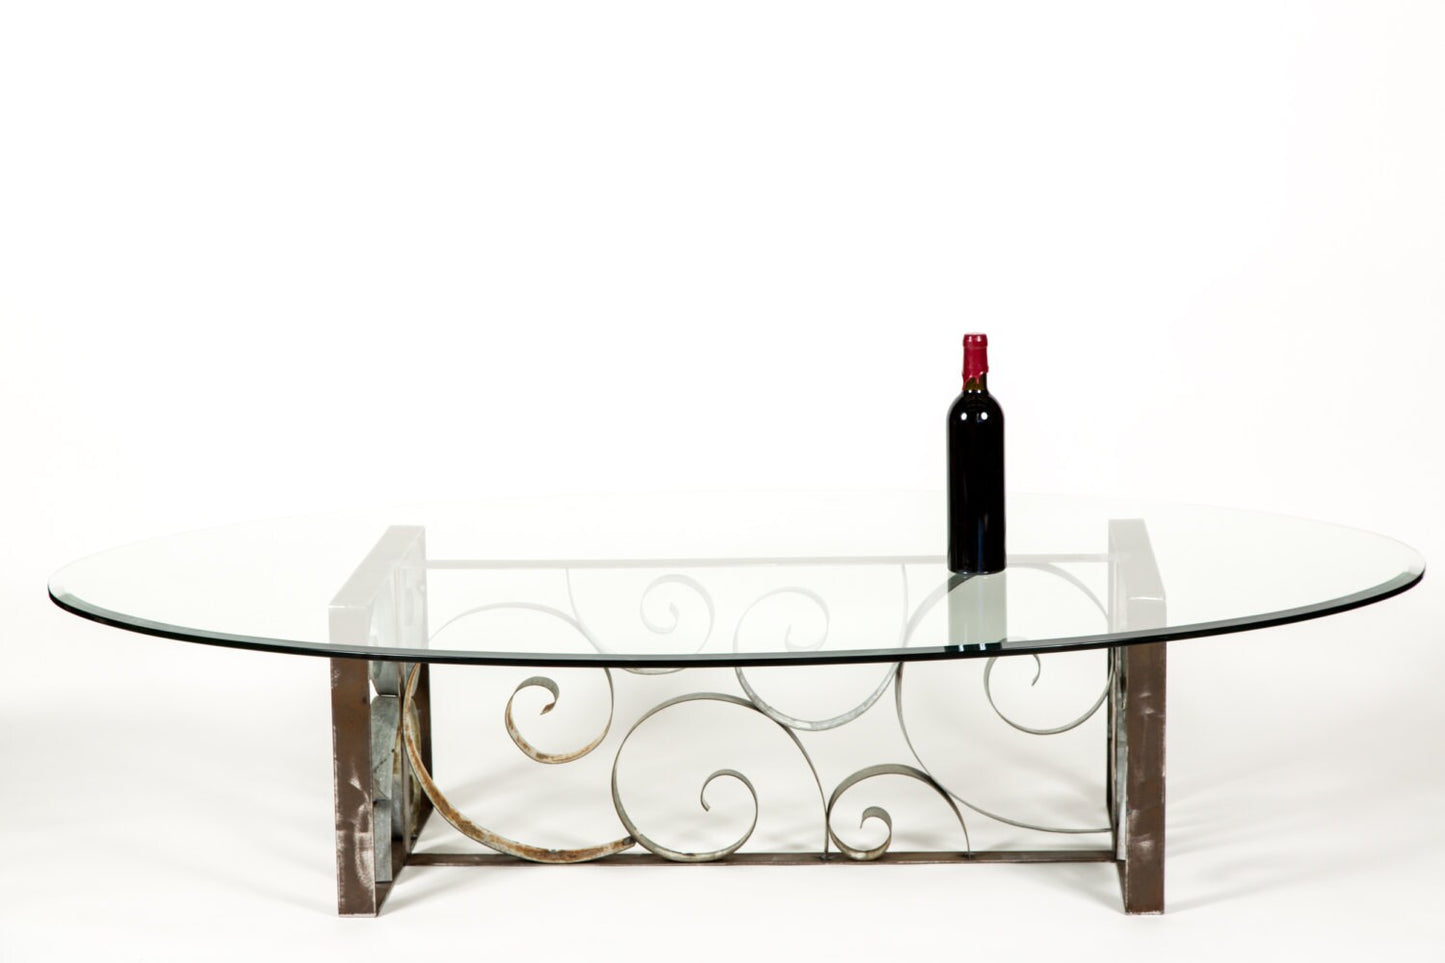 Wine Barrel Ring Coffee Table - Raiment V3 - made from retired wine barrel rings 100% Recycled!